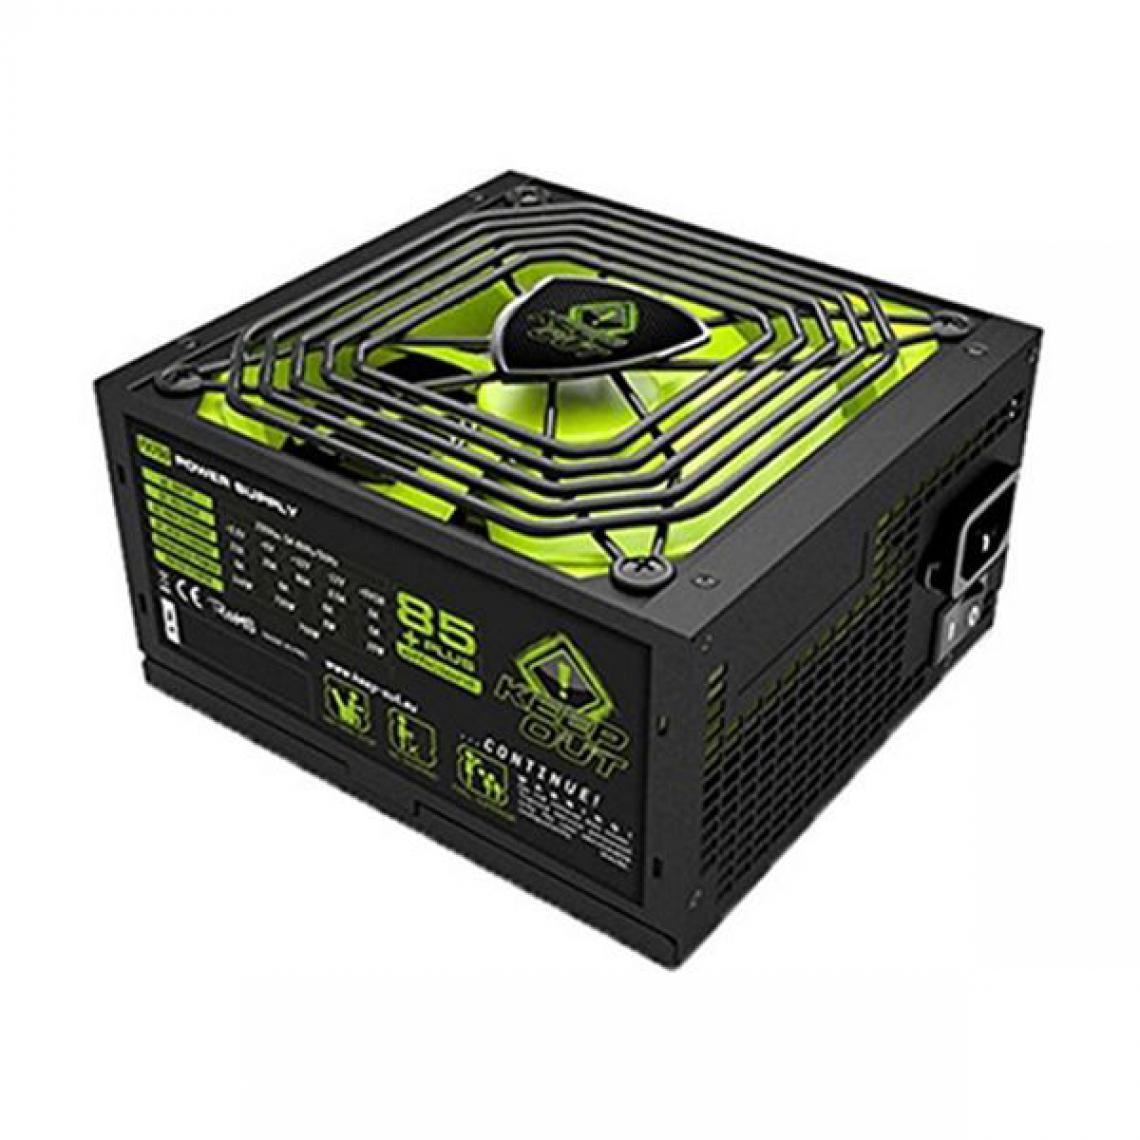 Keep Out - Source d'alimentation Gaming approx! FX900 ATX 900W - Alimentation modulaire